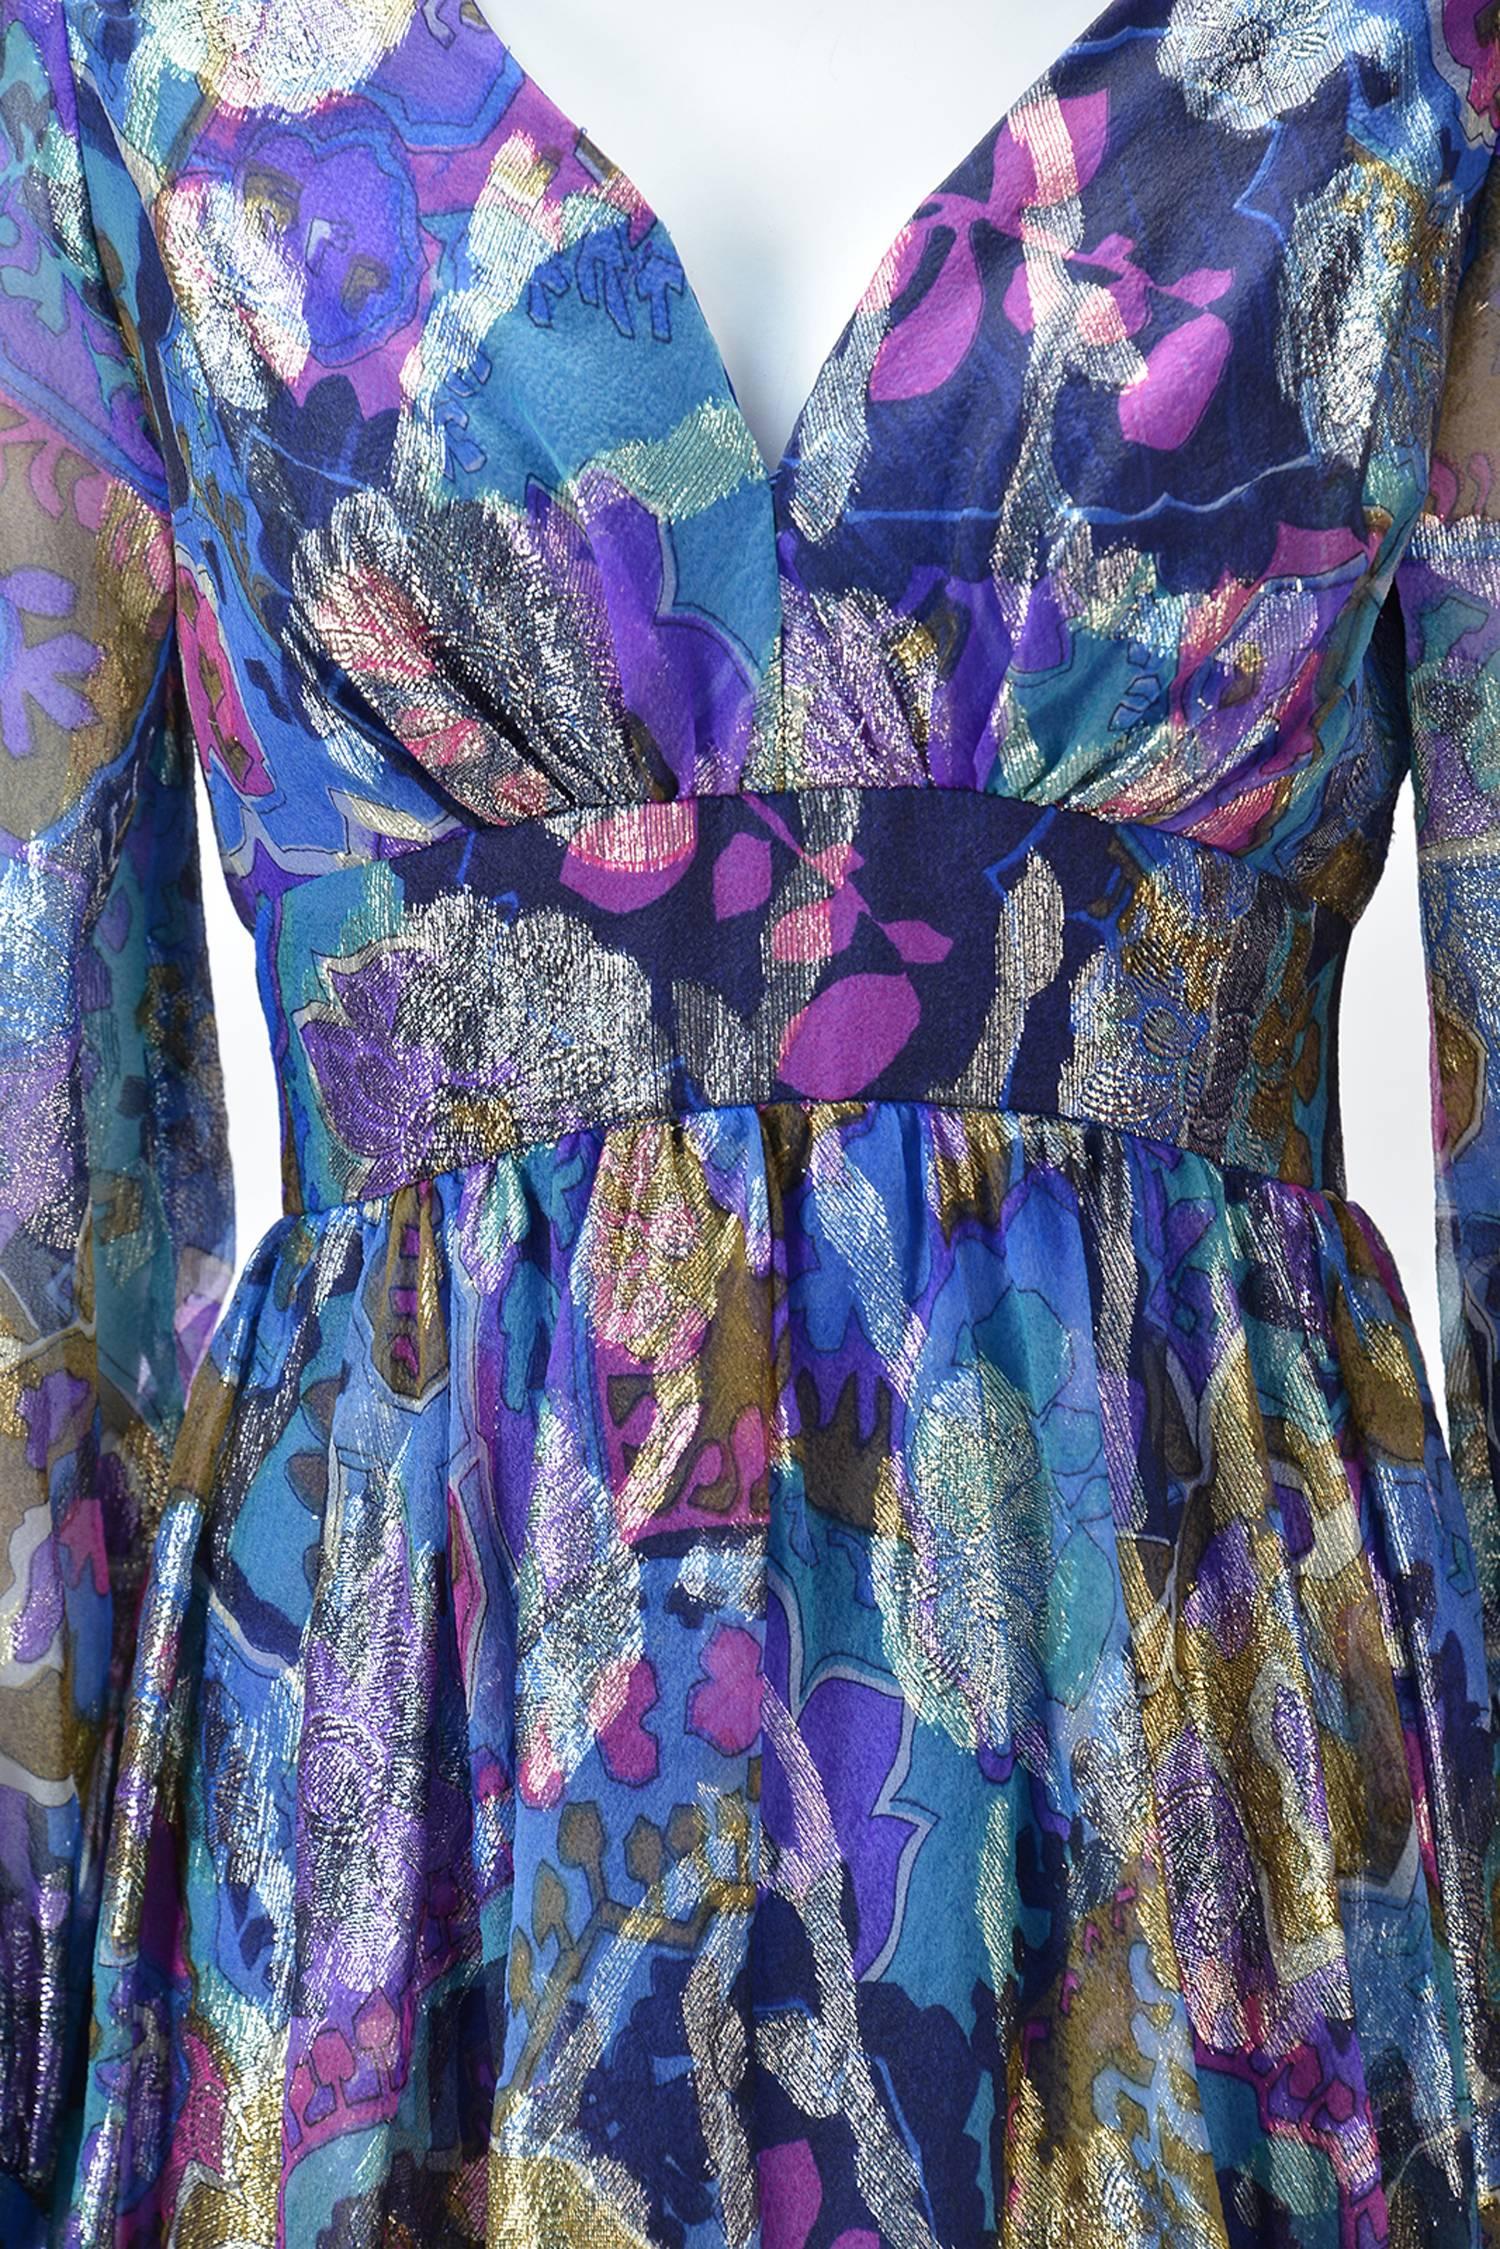 Gorgeous and fun 1970's Oscar de la Renta abstract floral, iridescent, metallic maxi dress is great for any Holiday party.  This dress has hues of purple & blue with gold metallic threads in a blossom motif.

Empire waist dress has wide waist band